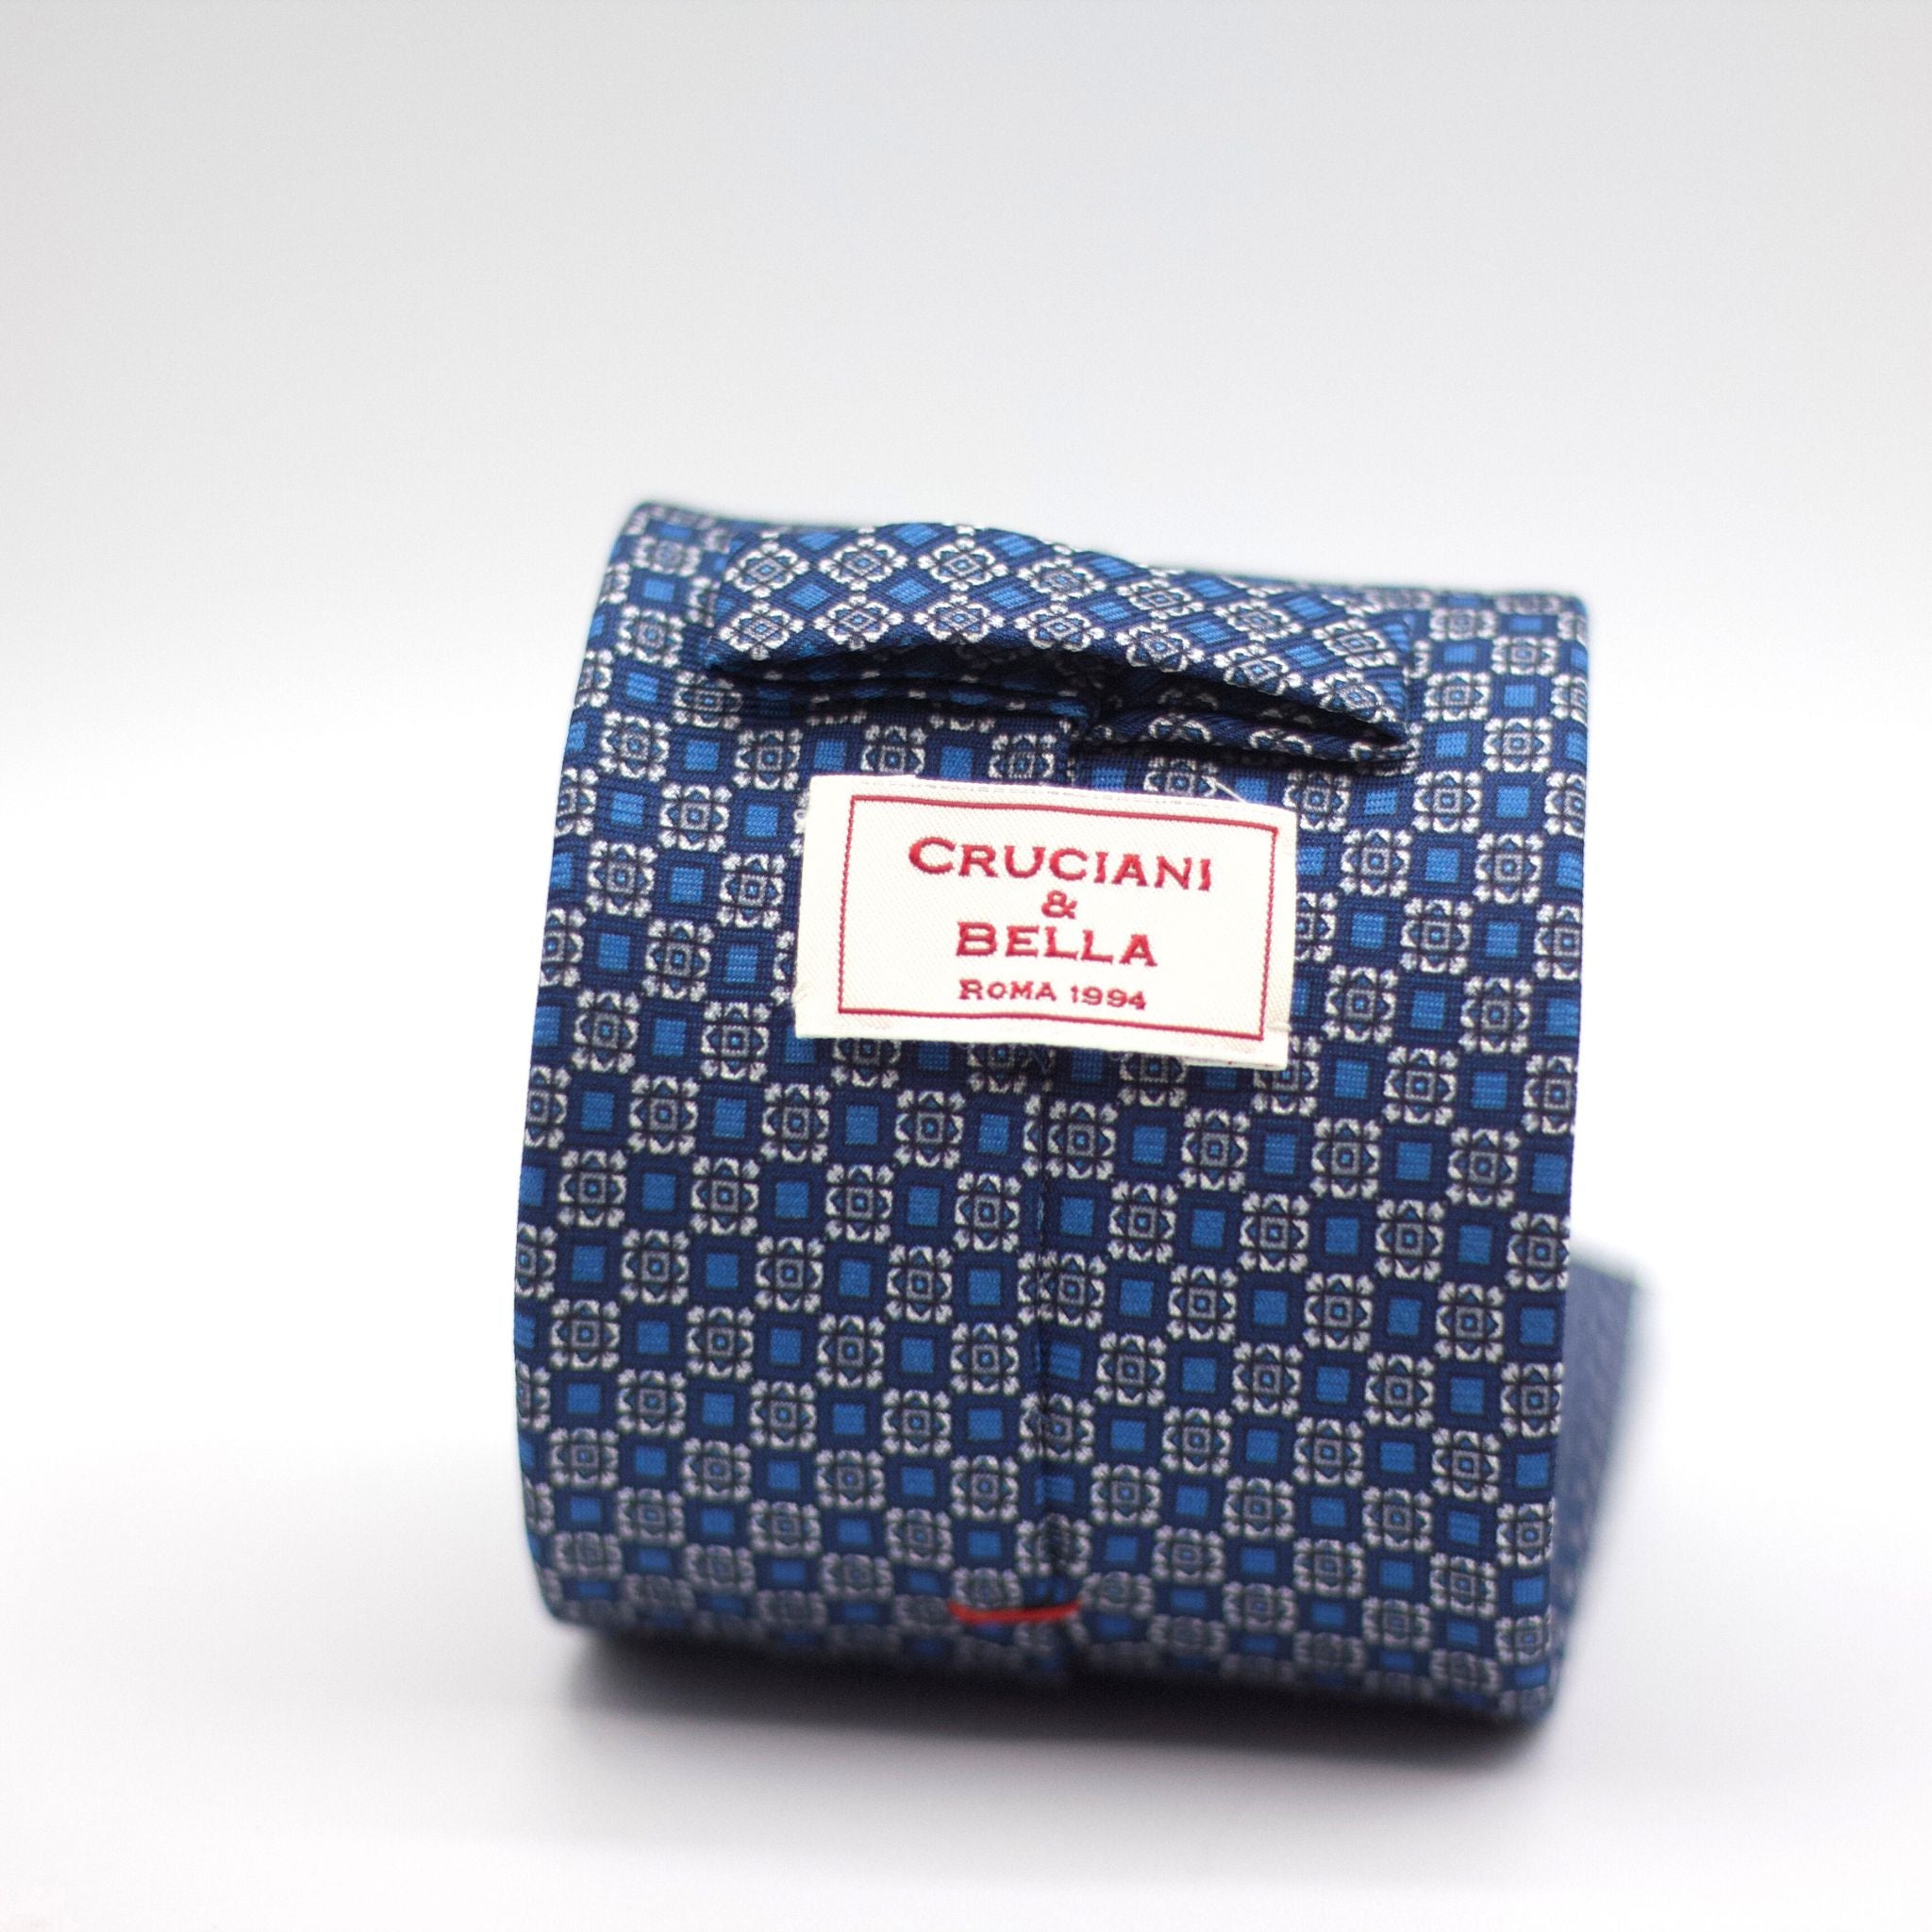 Cruciani & Bella 100% Silk Printed Self-Tipped Blue, White and Light Blue Tie Handmade in Rome, Italy. 8 cm x 150 cm